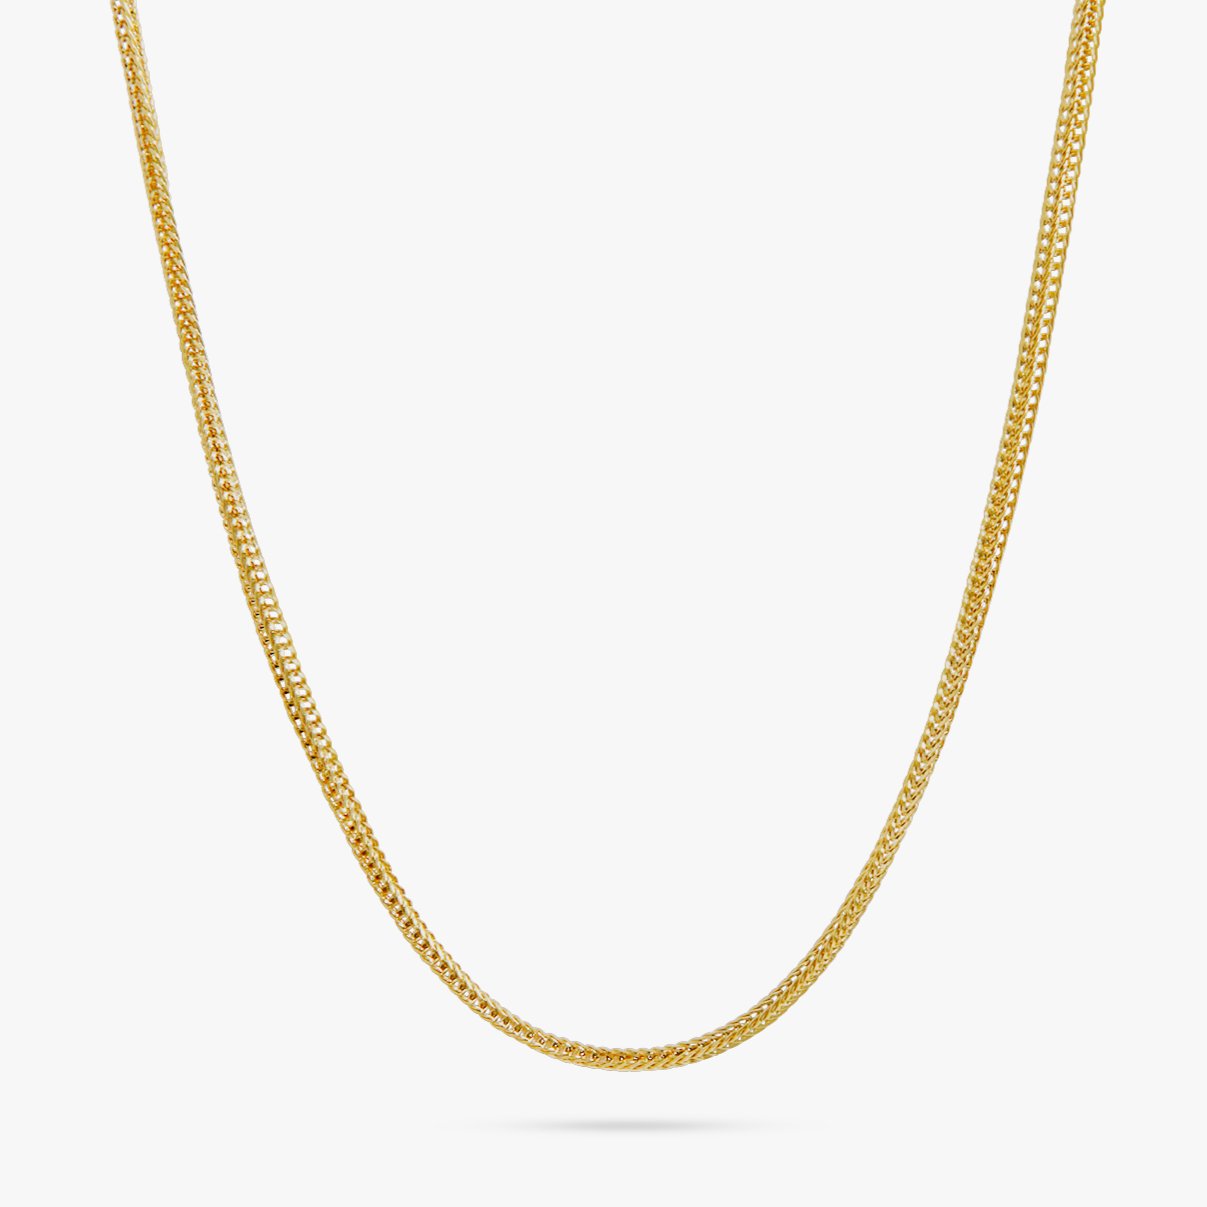 Quinn Mesh Chain in Gold (Unisex) - Flaire & Co.